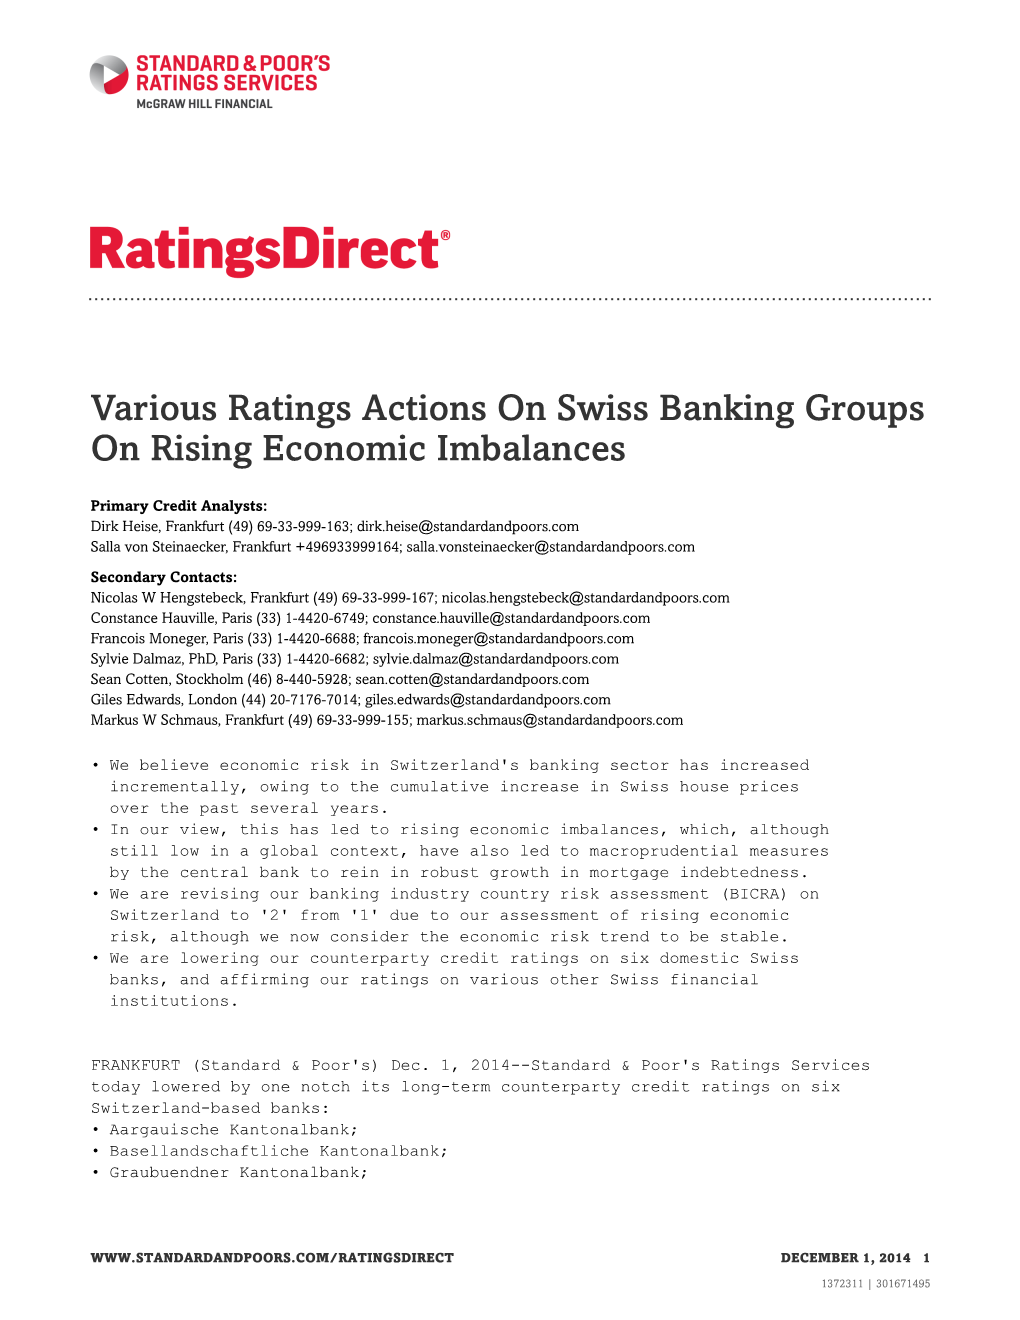 Various Ratings Actions on Swiss Banking Groups on Rising Economic Imbalances